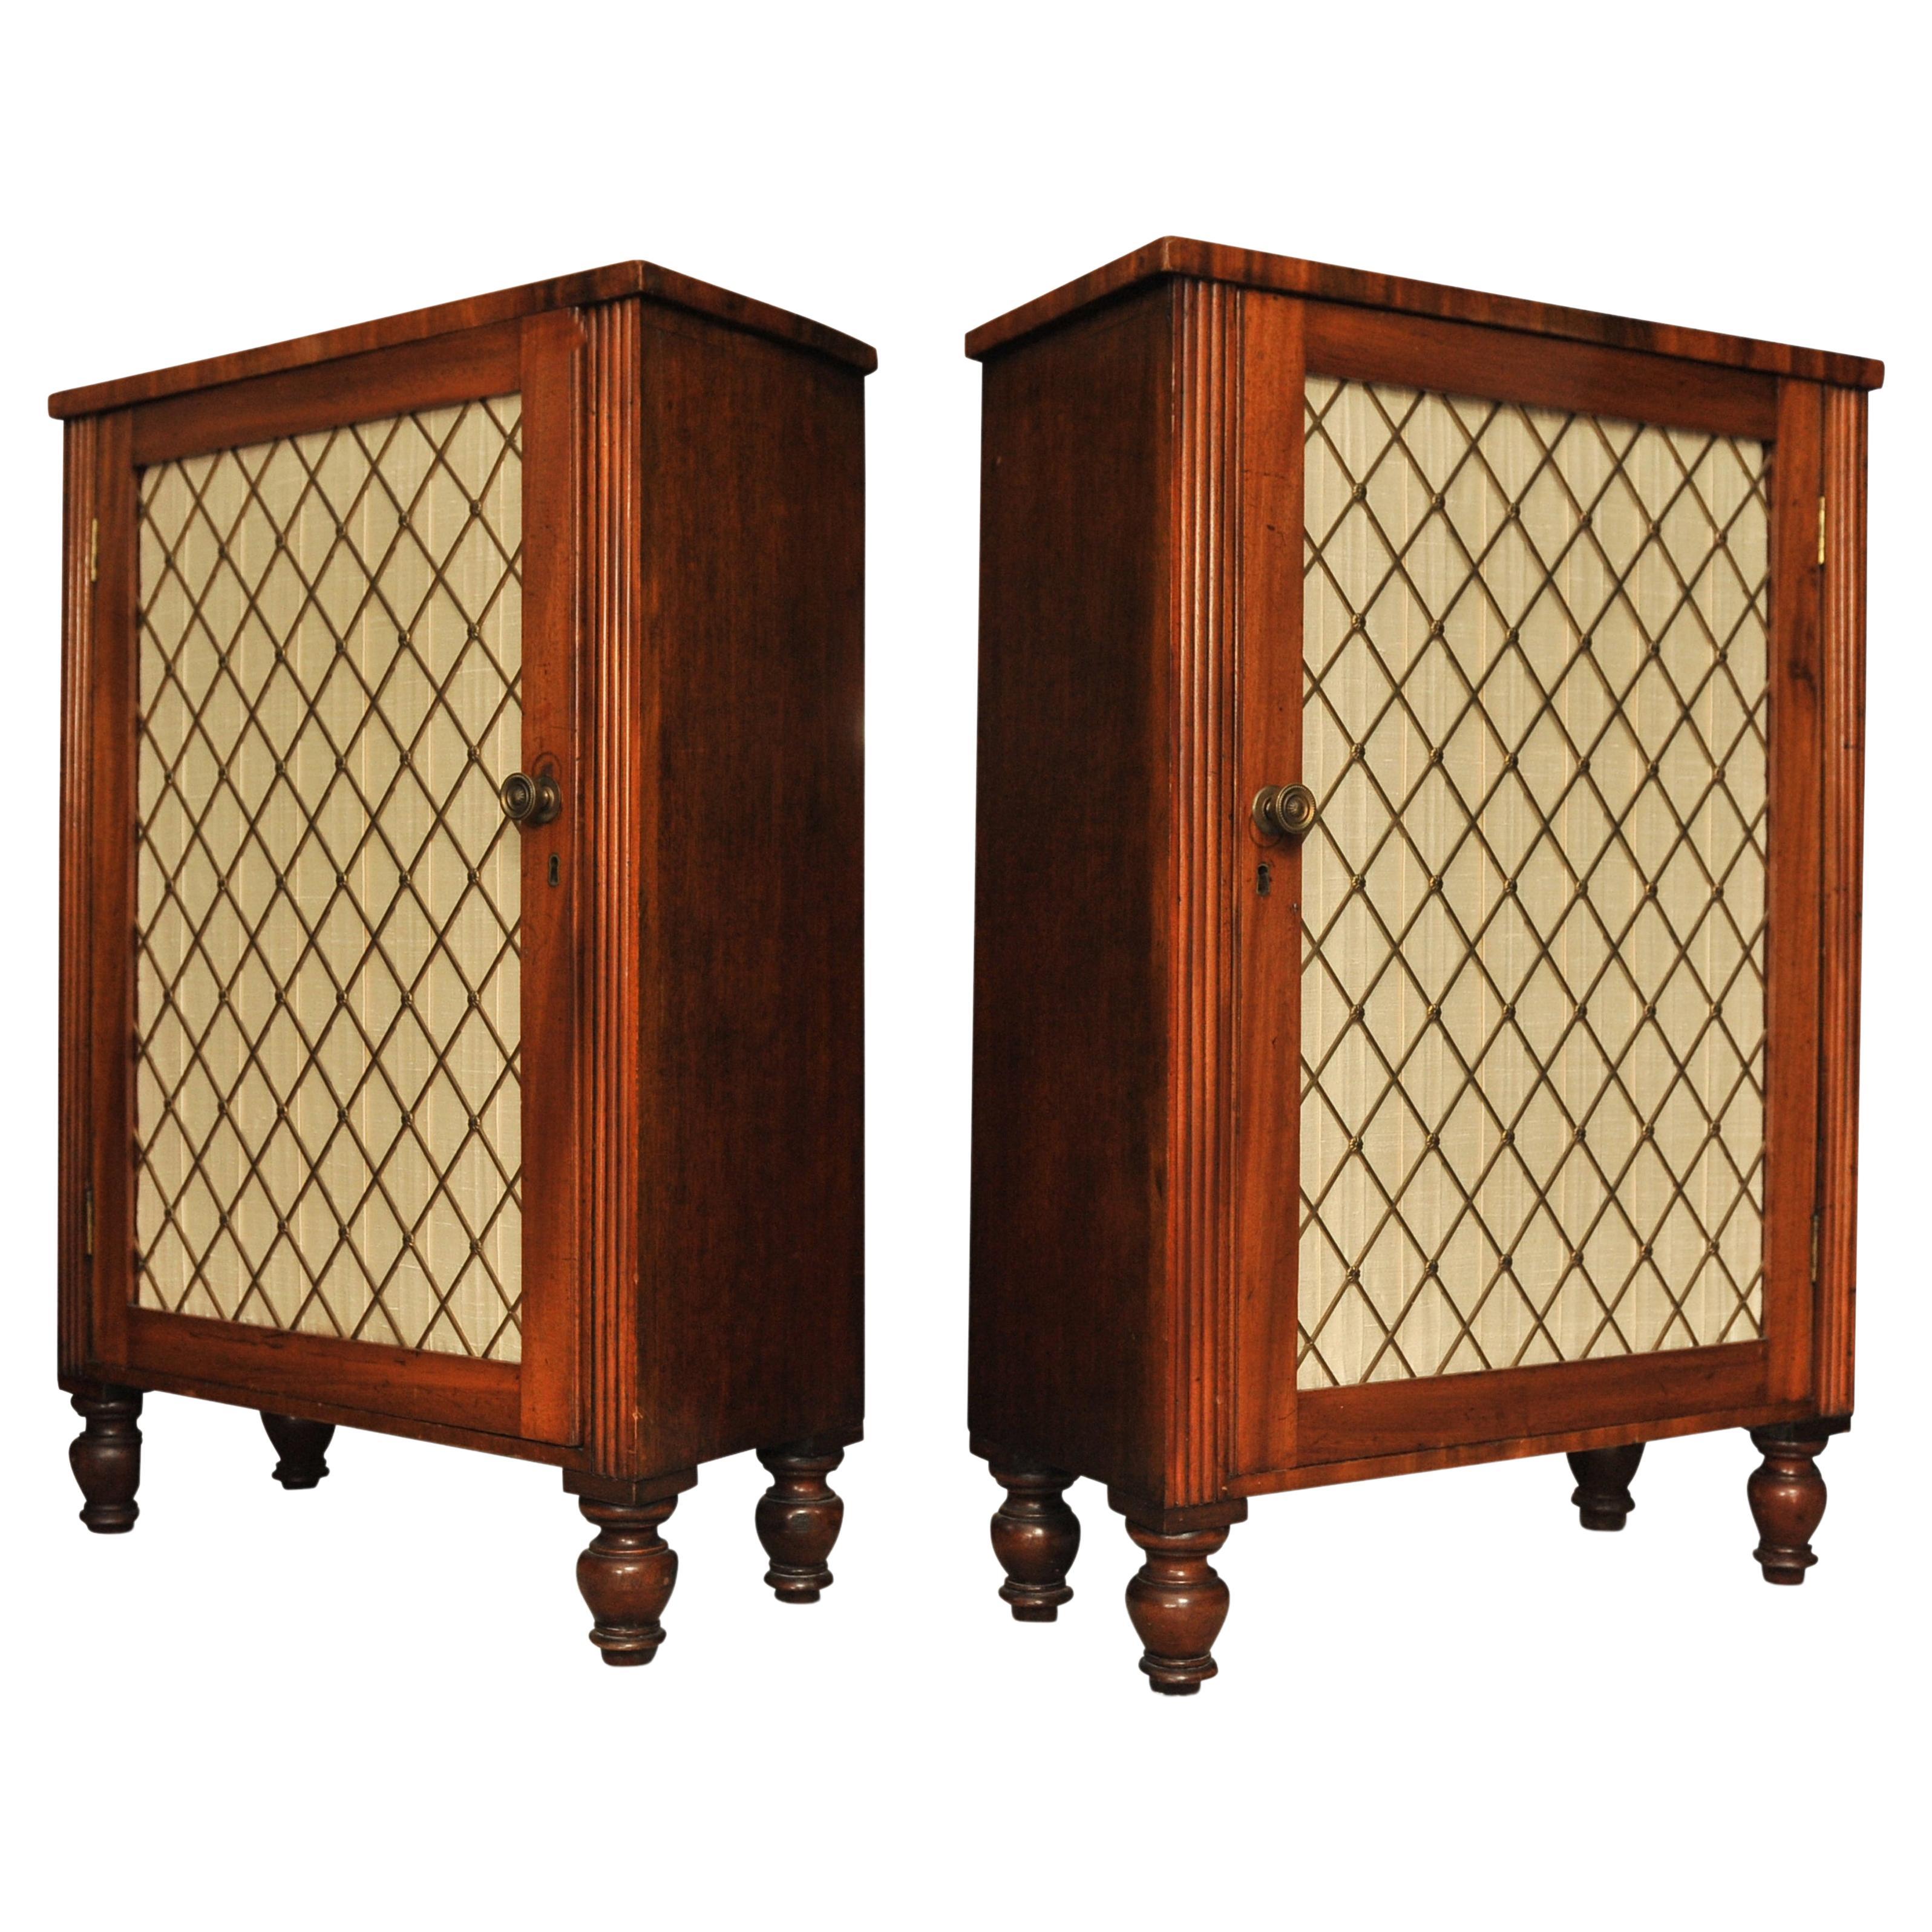 Rare Pair of Regency Period Mahogany Side Cabinets with Brass Lattice Fronts For Sale